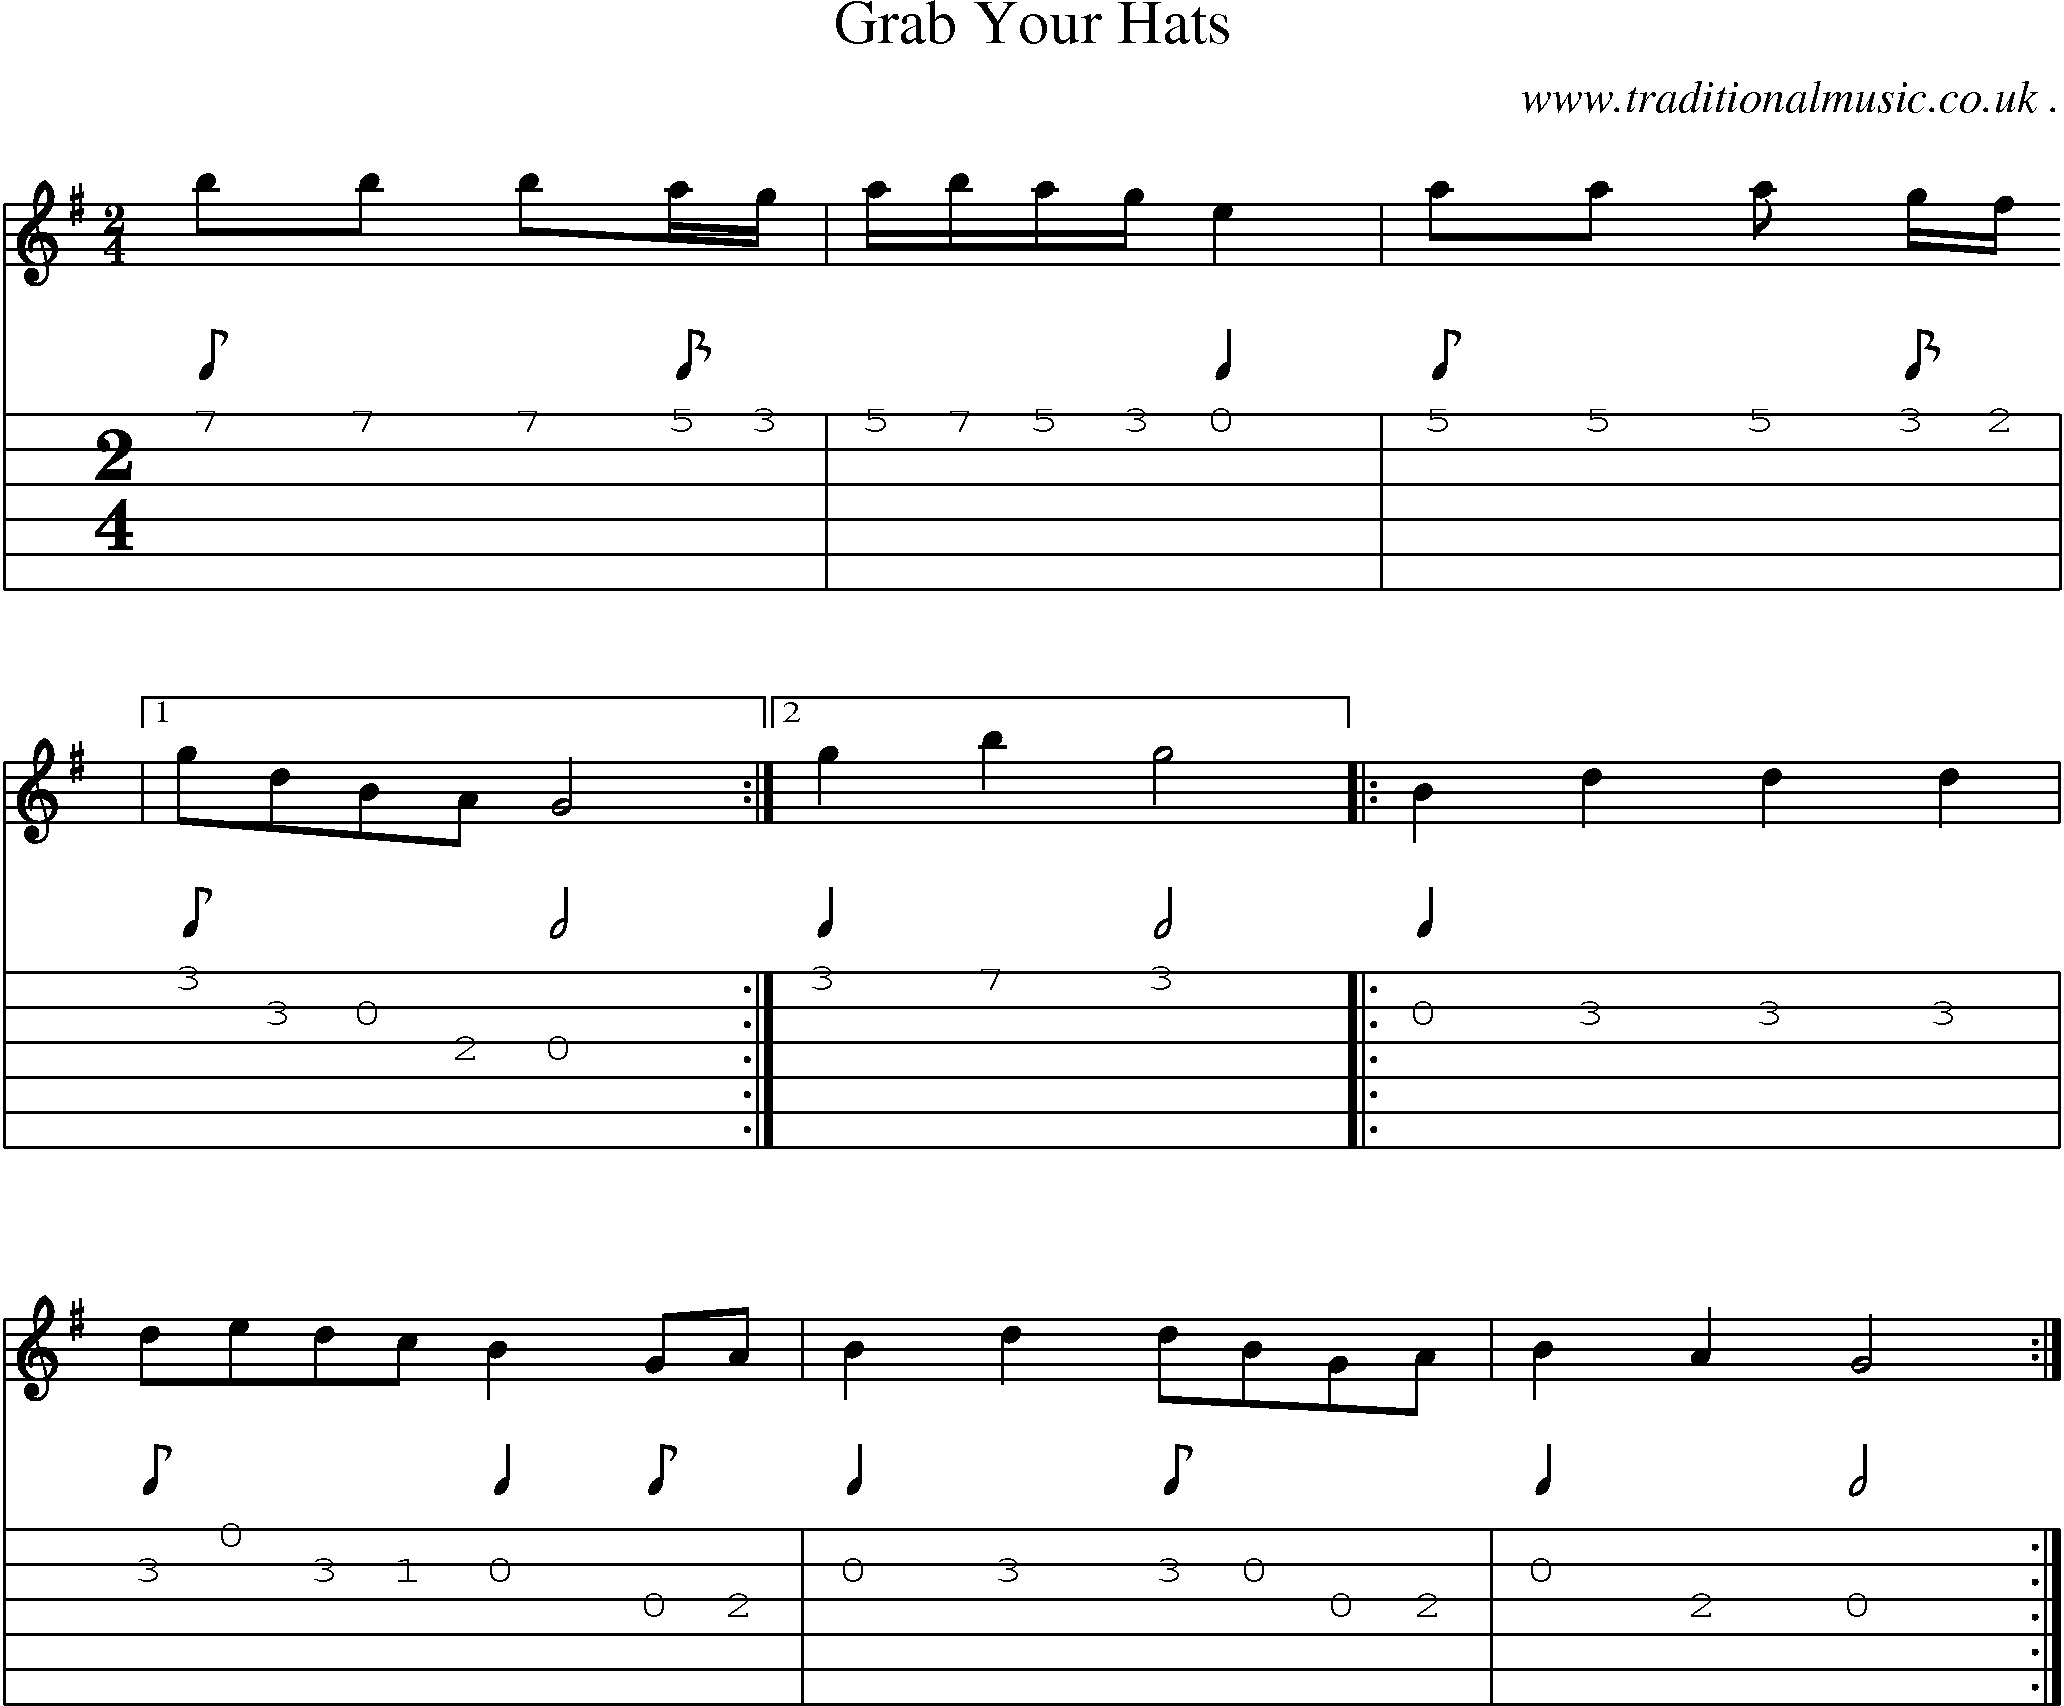 Sheet-Music and Guitar Tabs for Grab Your Hats